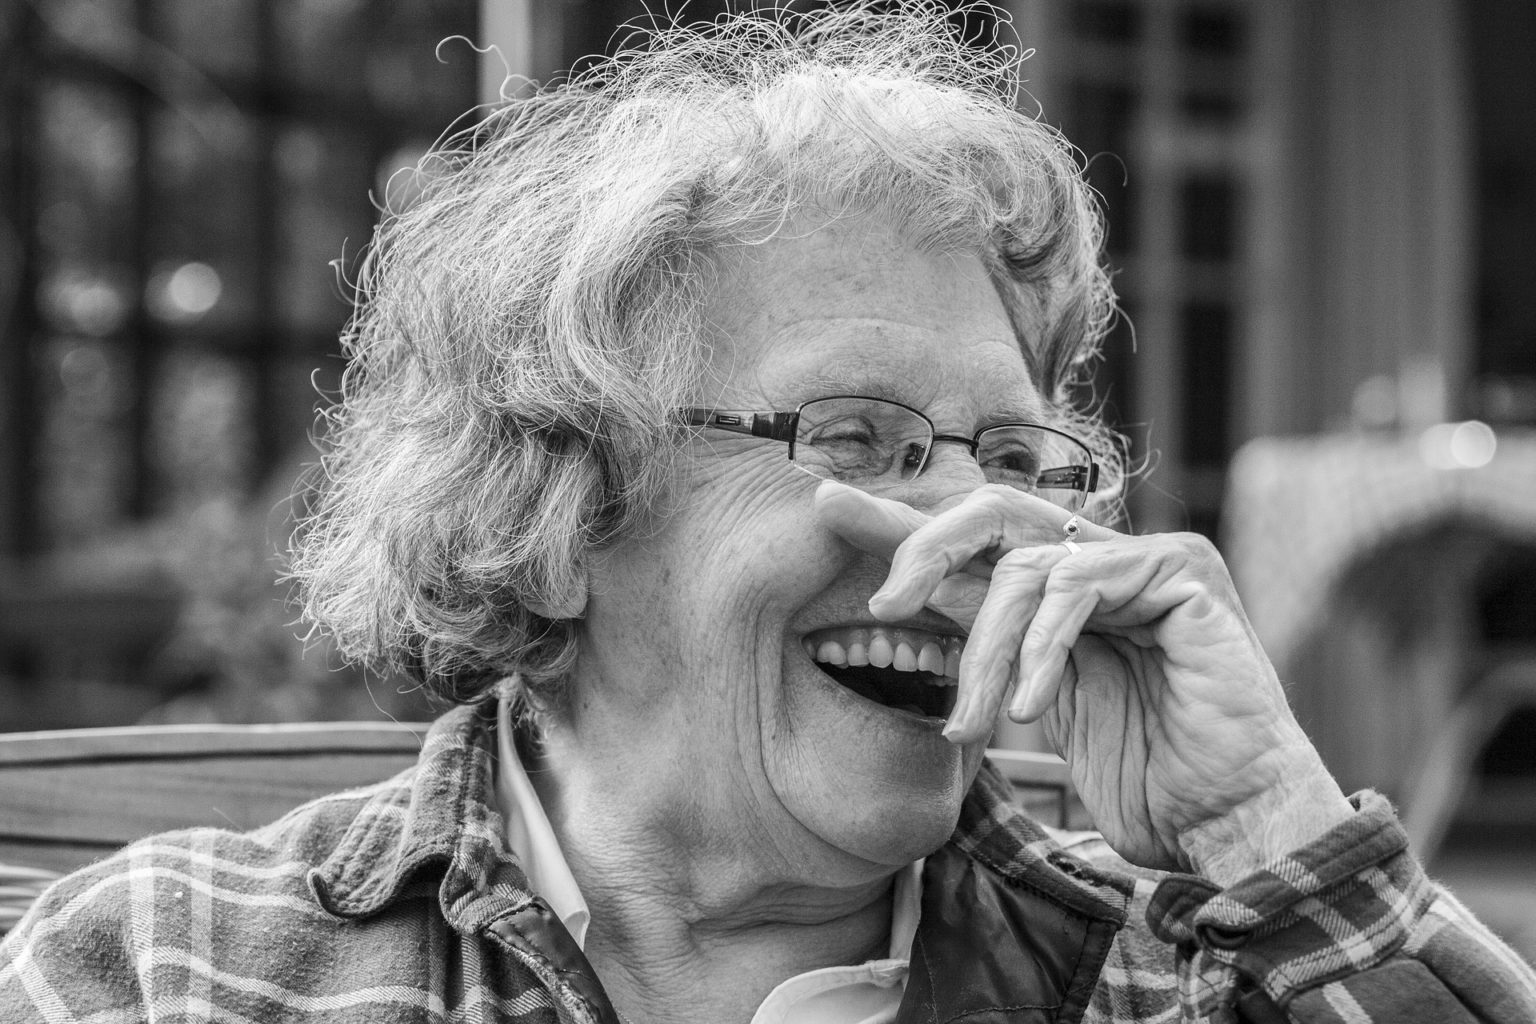 A woman laughing and showing her teeth